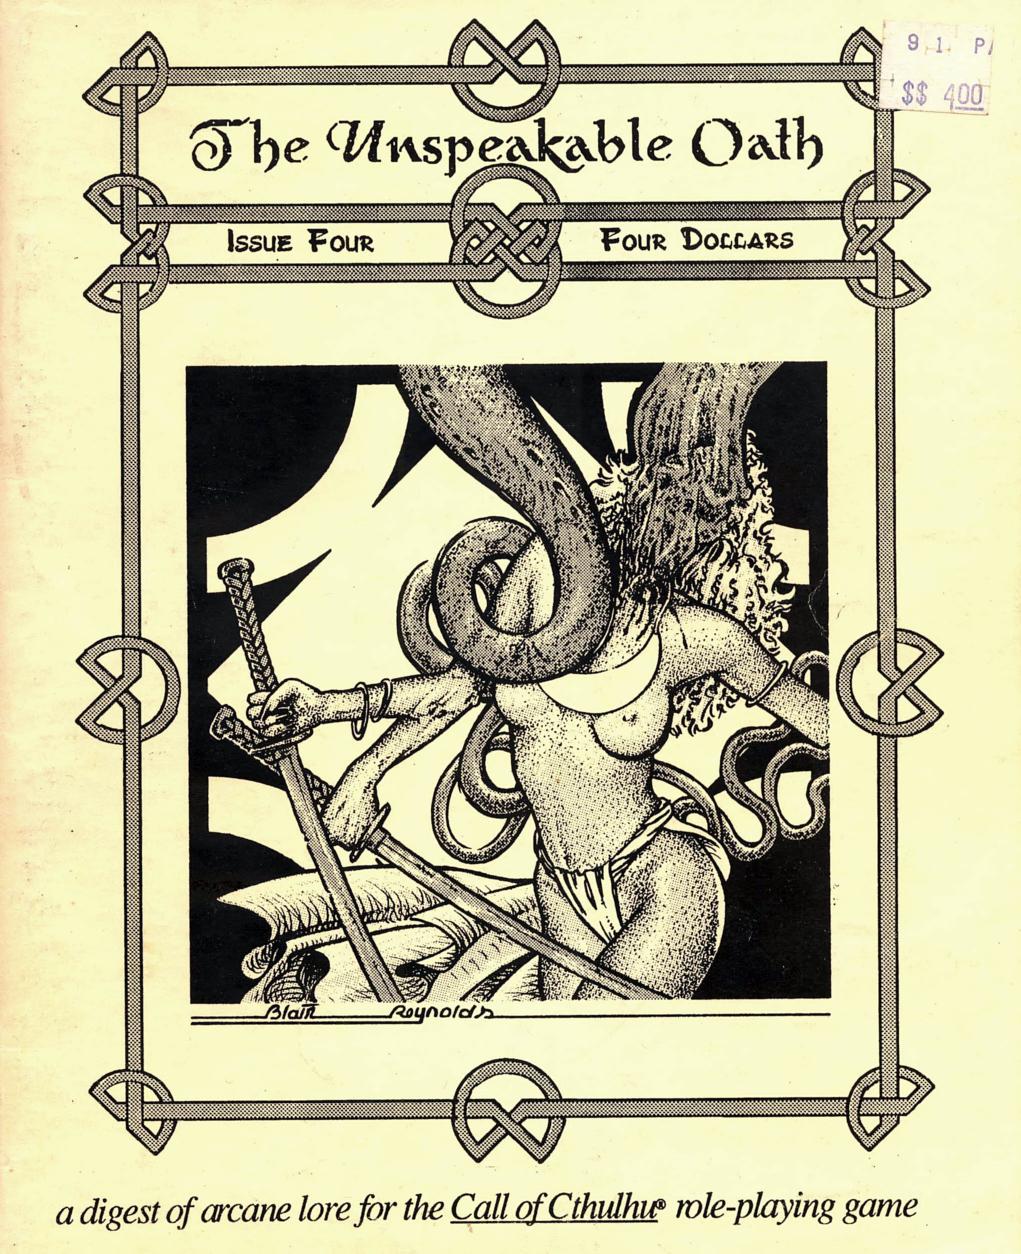 The Unspeakable Oath No 04 - Call of Cthulhu Magazine